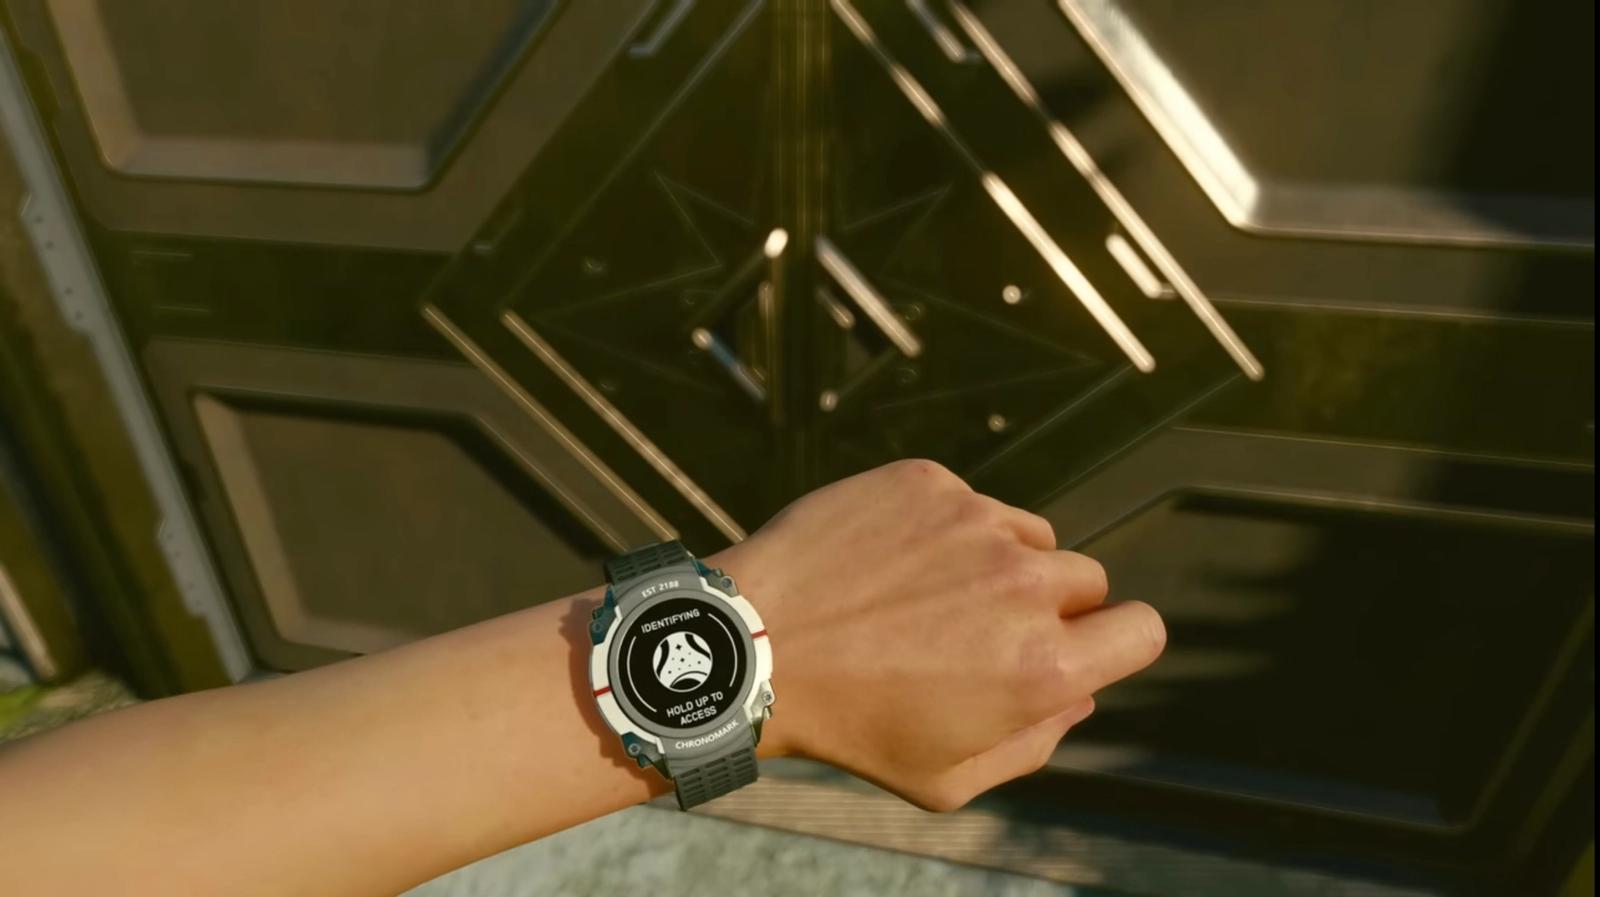 Player looks at the watch on their wrist